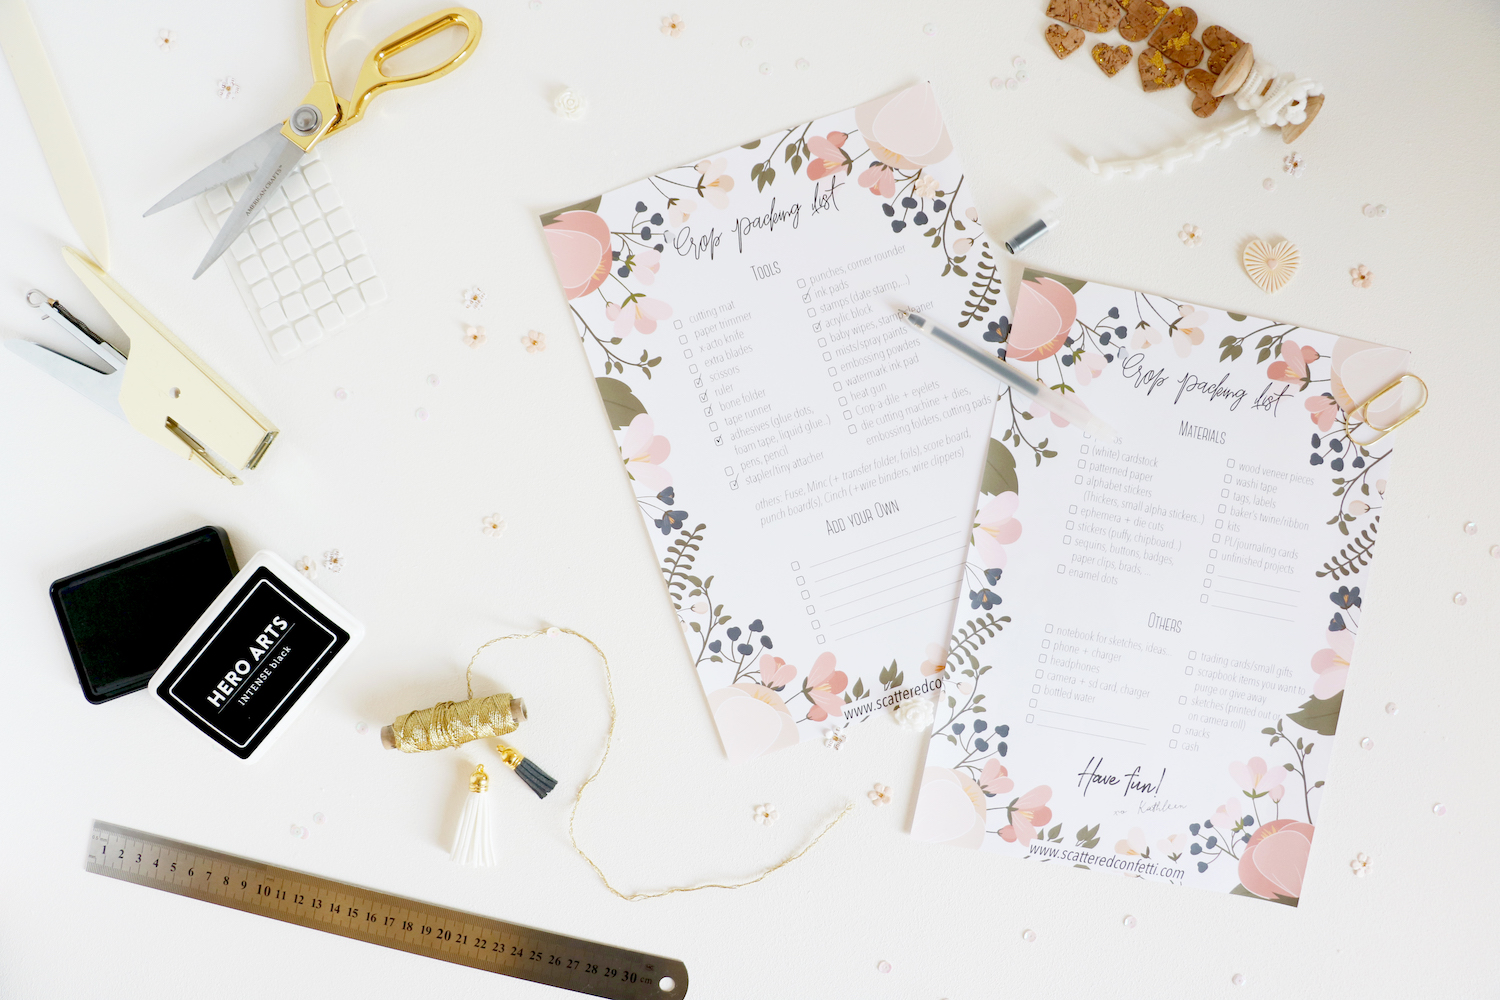 Crop Packing List/Checklist by ScatteredConfetti. // #scrapbooking #papercrafting #memorykeeping